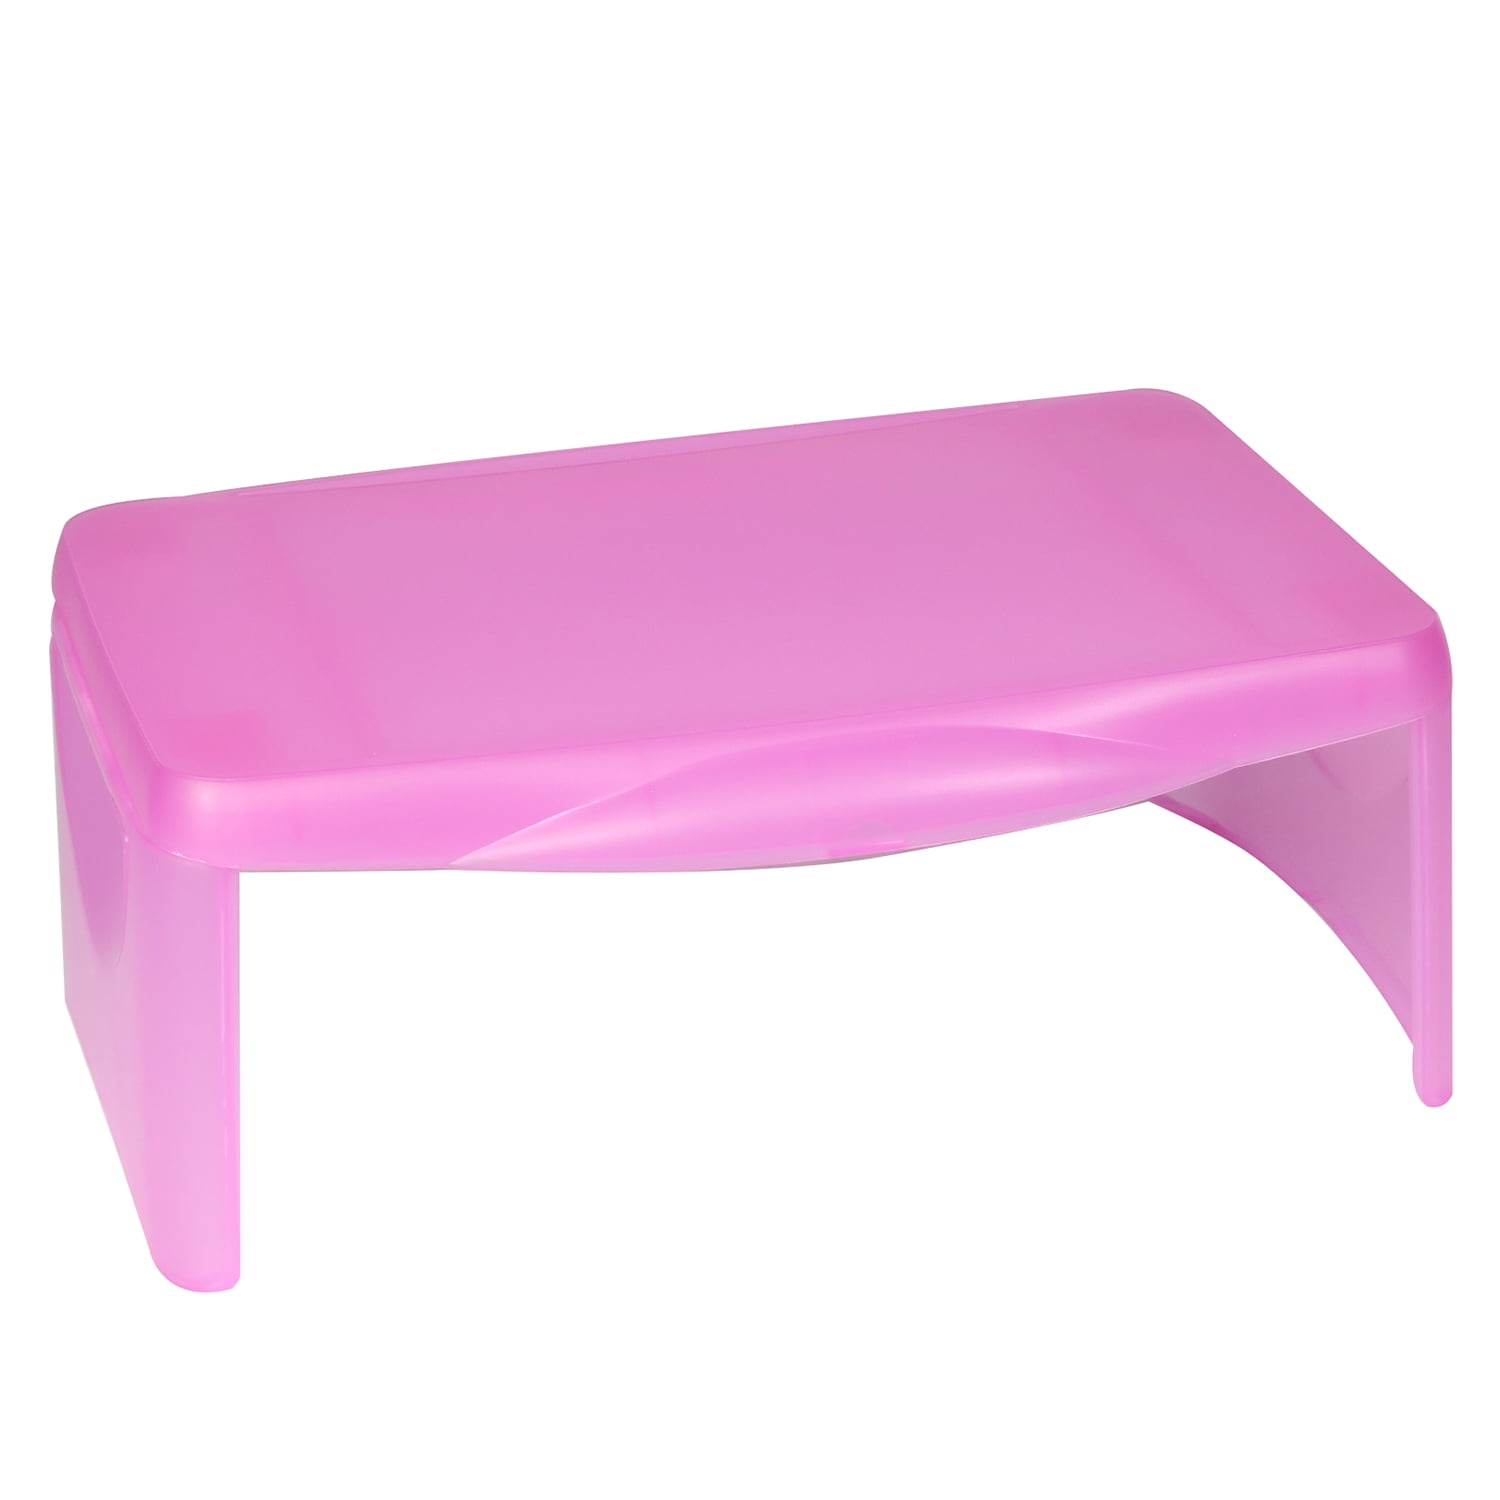 Everything Mary Collapsible Lap Desk Pink Walmart Inventory